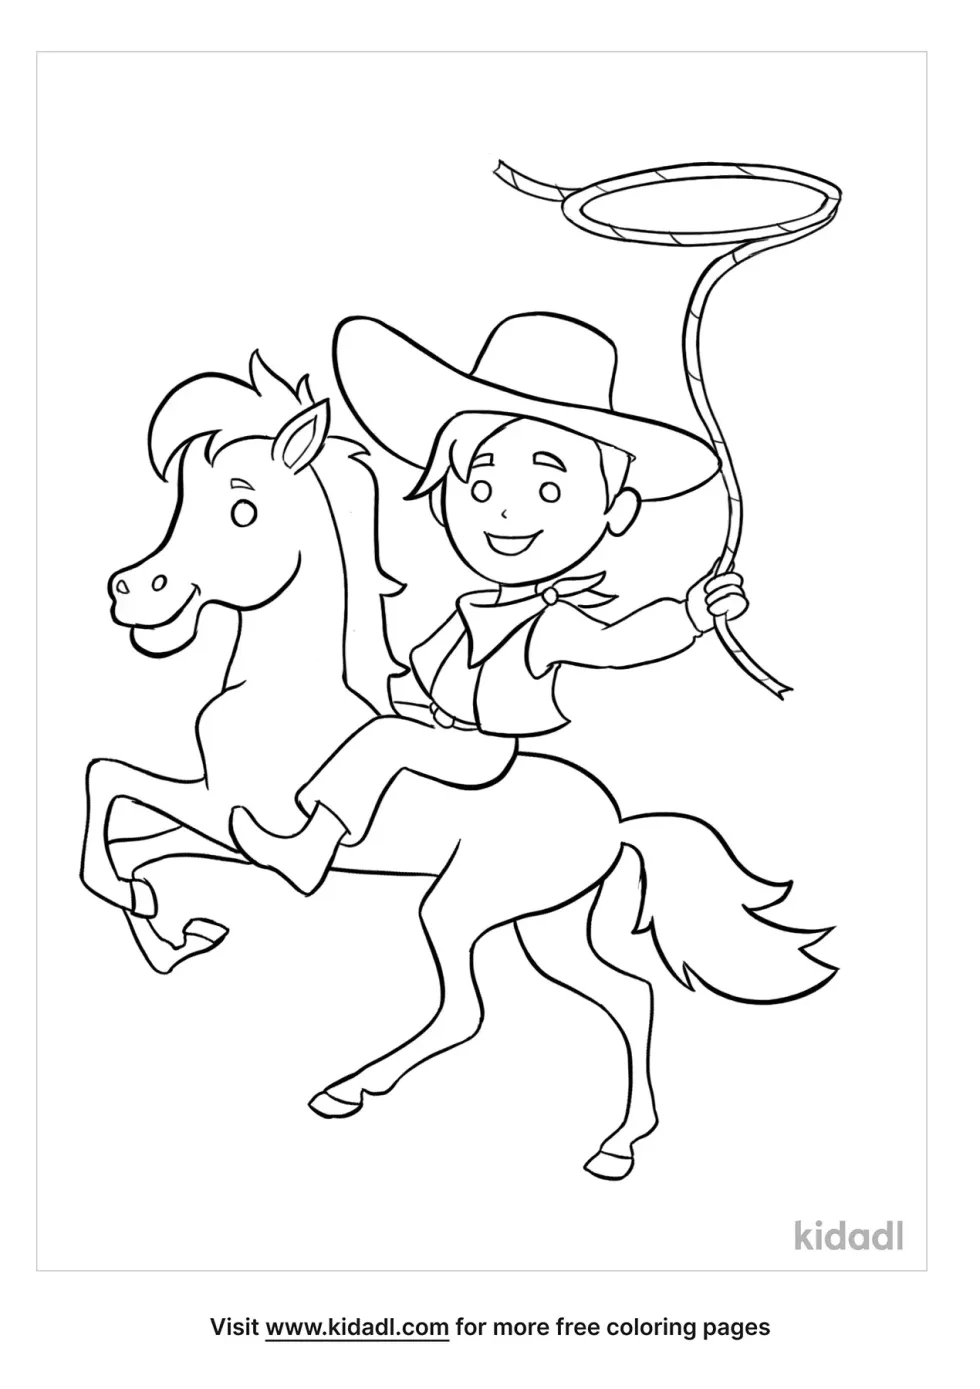 Cowboy On Horse Coloring Page